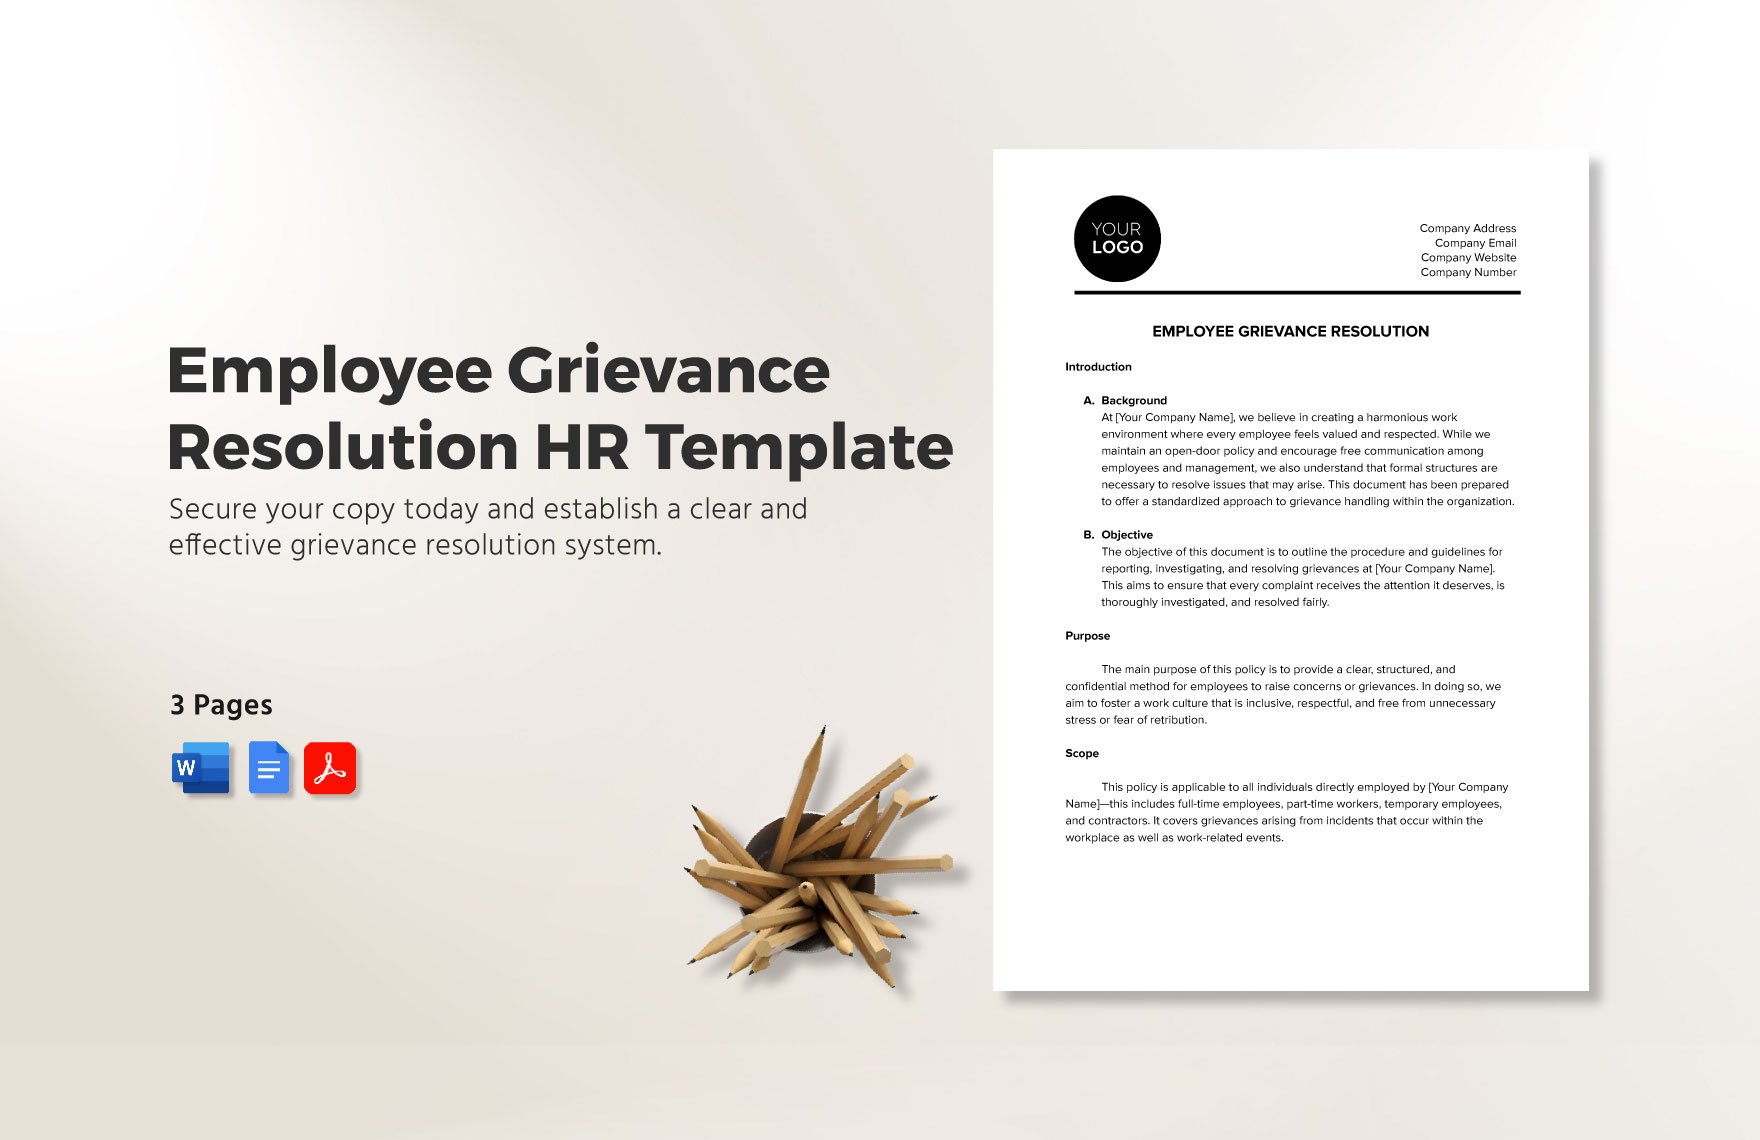 Employee Grievance Resolution HR Template in Word, Google Docs, PDF